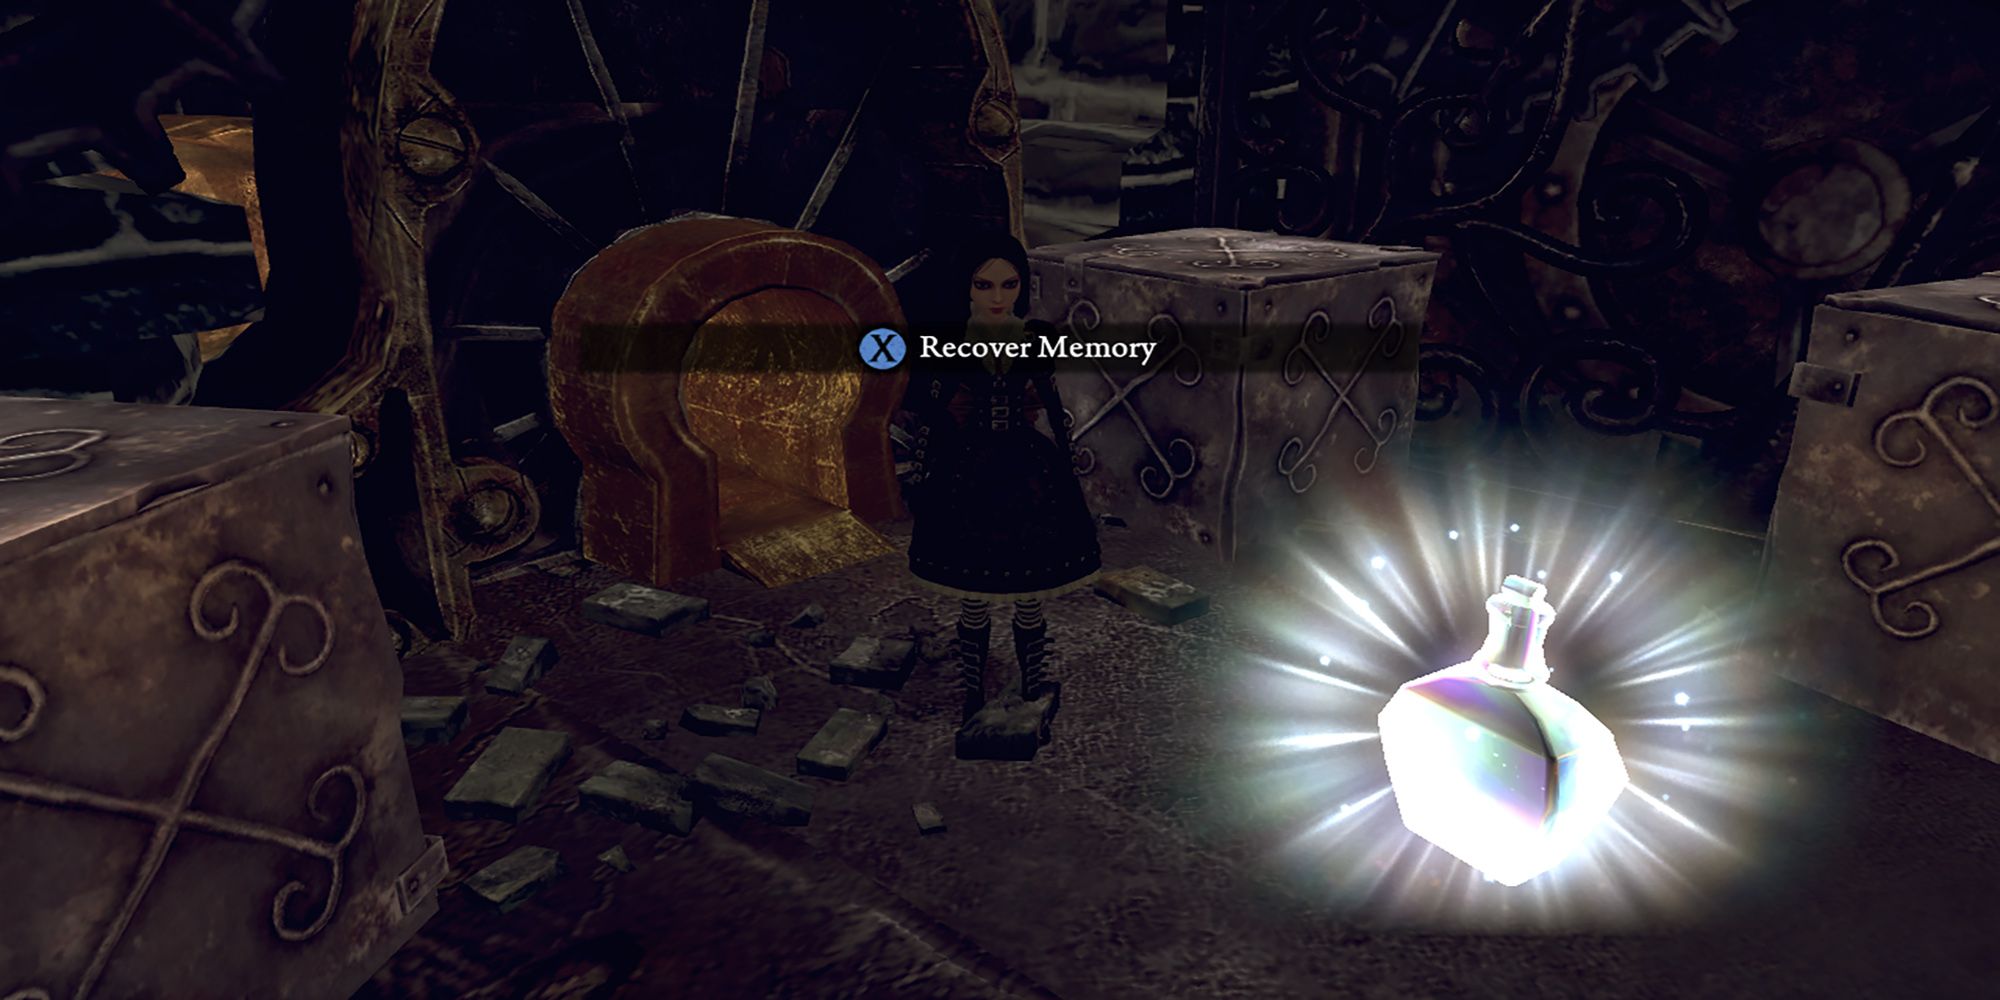 Alice approaches a shining liquor bottle memory in the Mad Hatter's empire. Alice: Madness Returns.